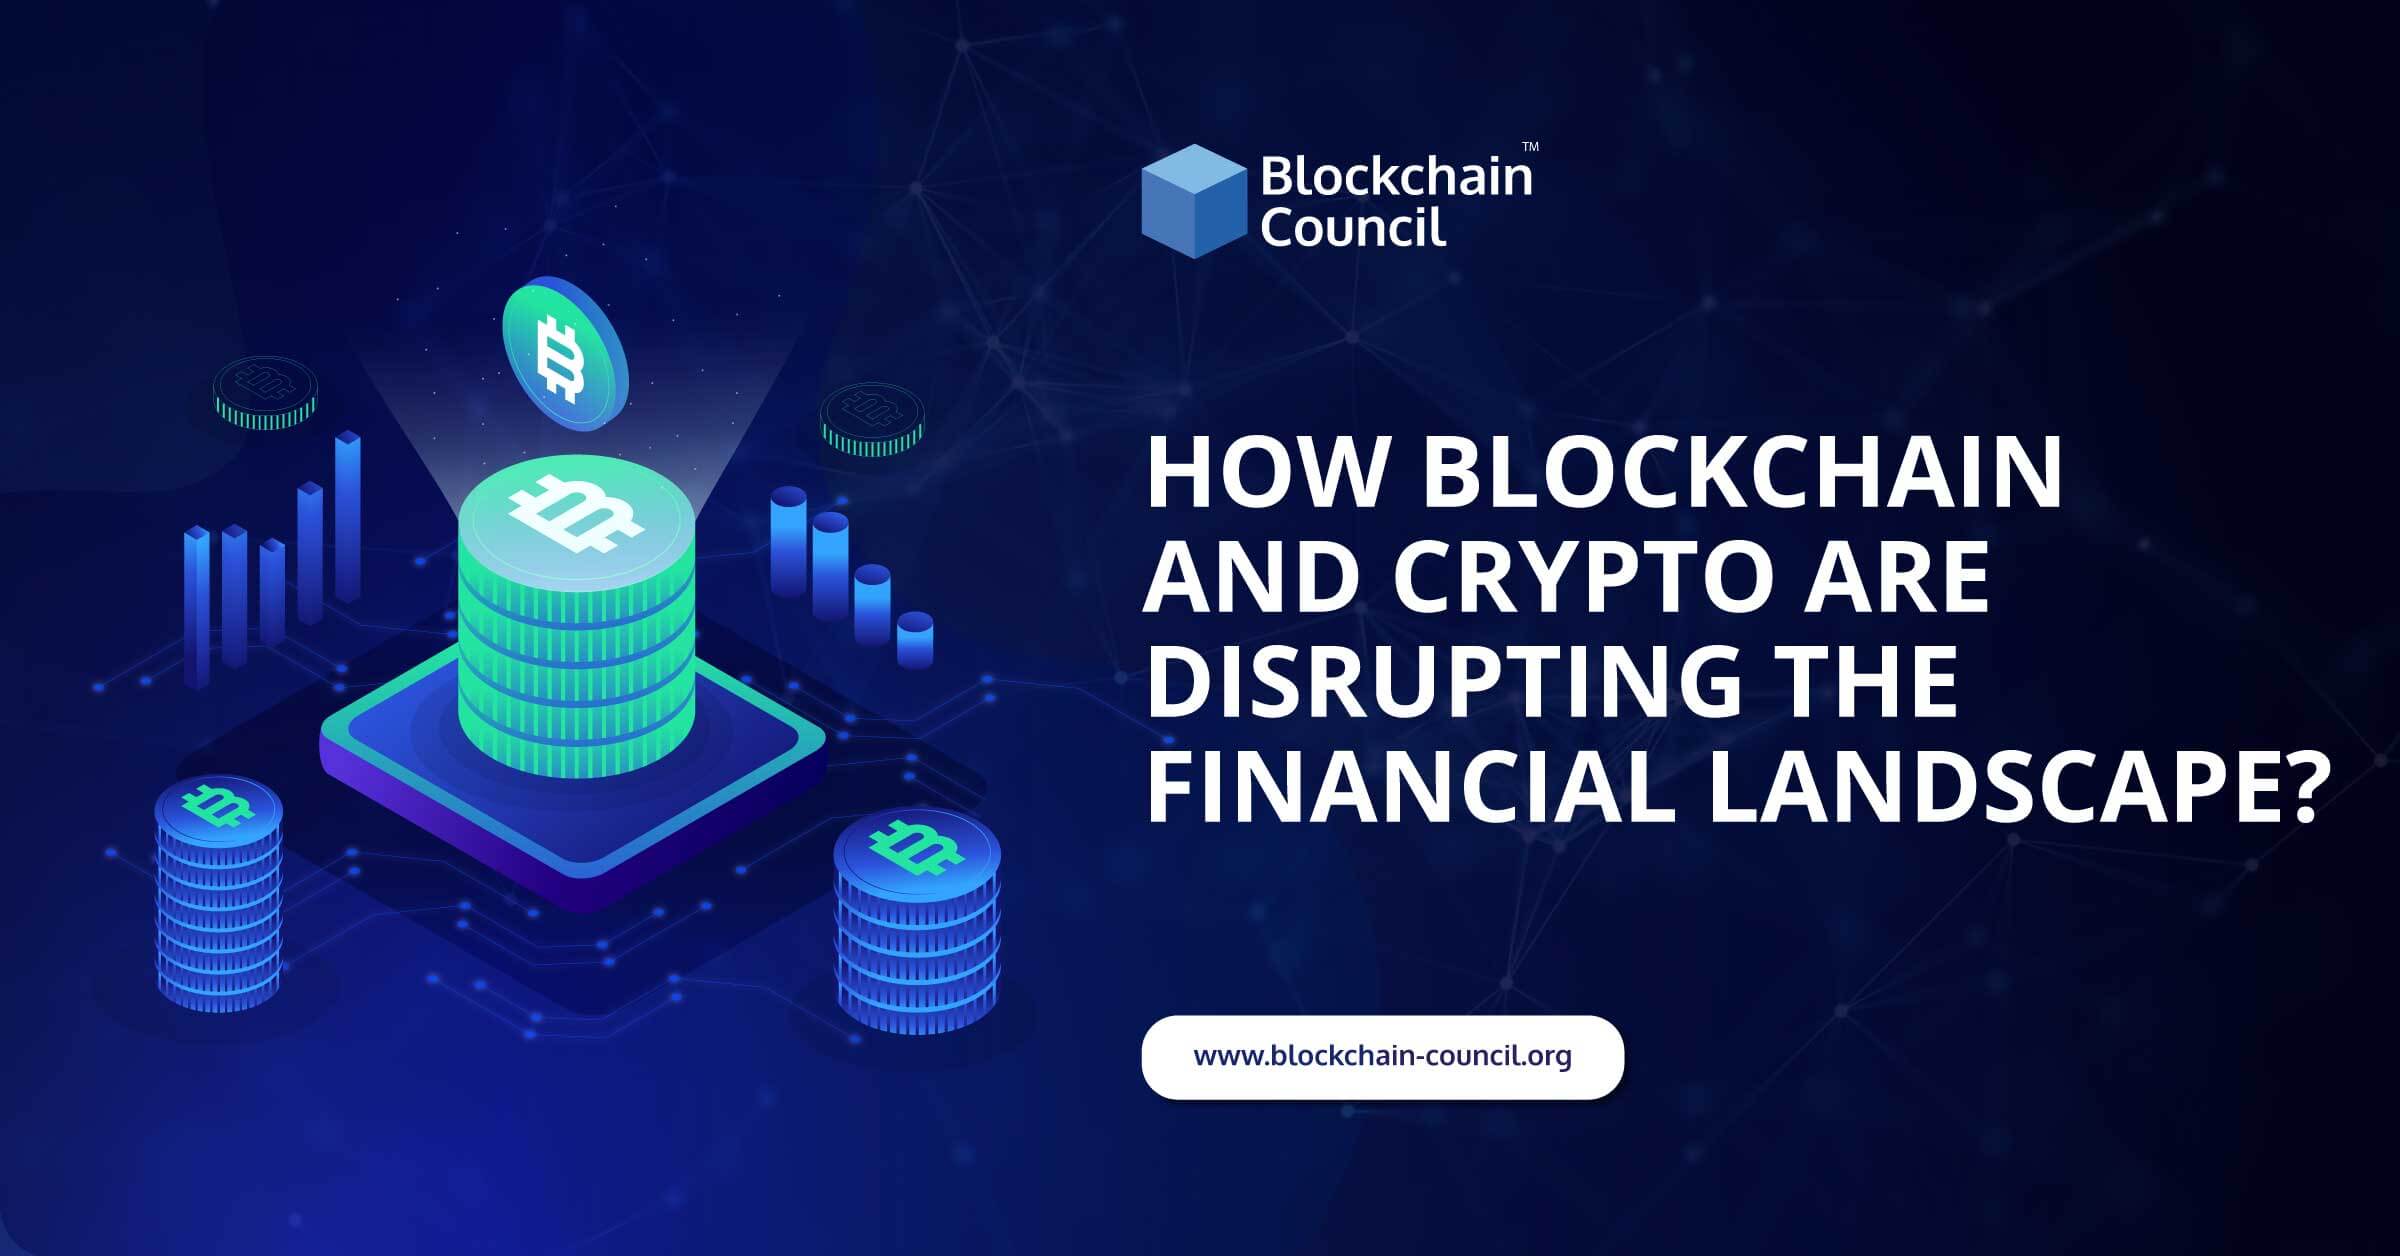 How Blockchain and Crypto Are Disrupting the Financial Landscape?